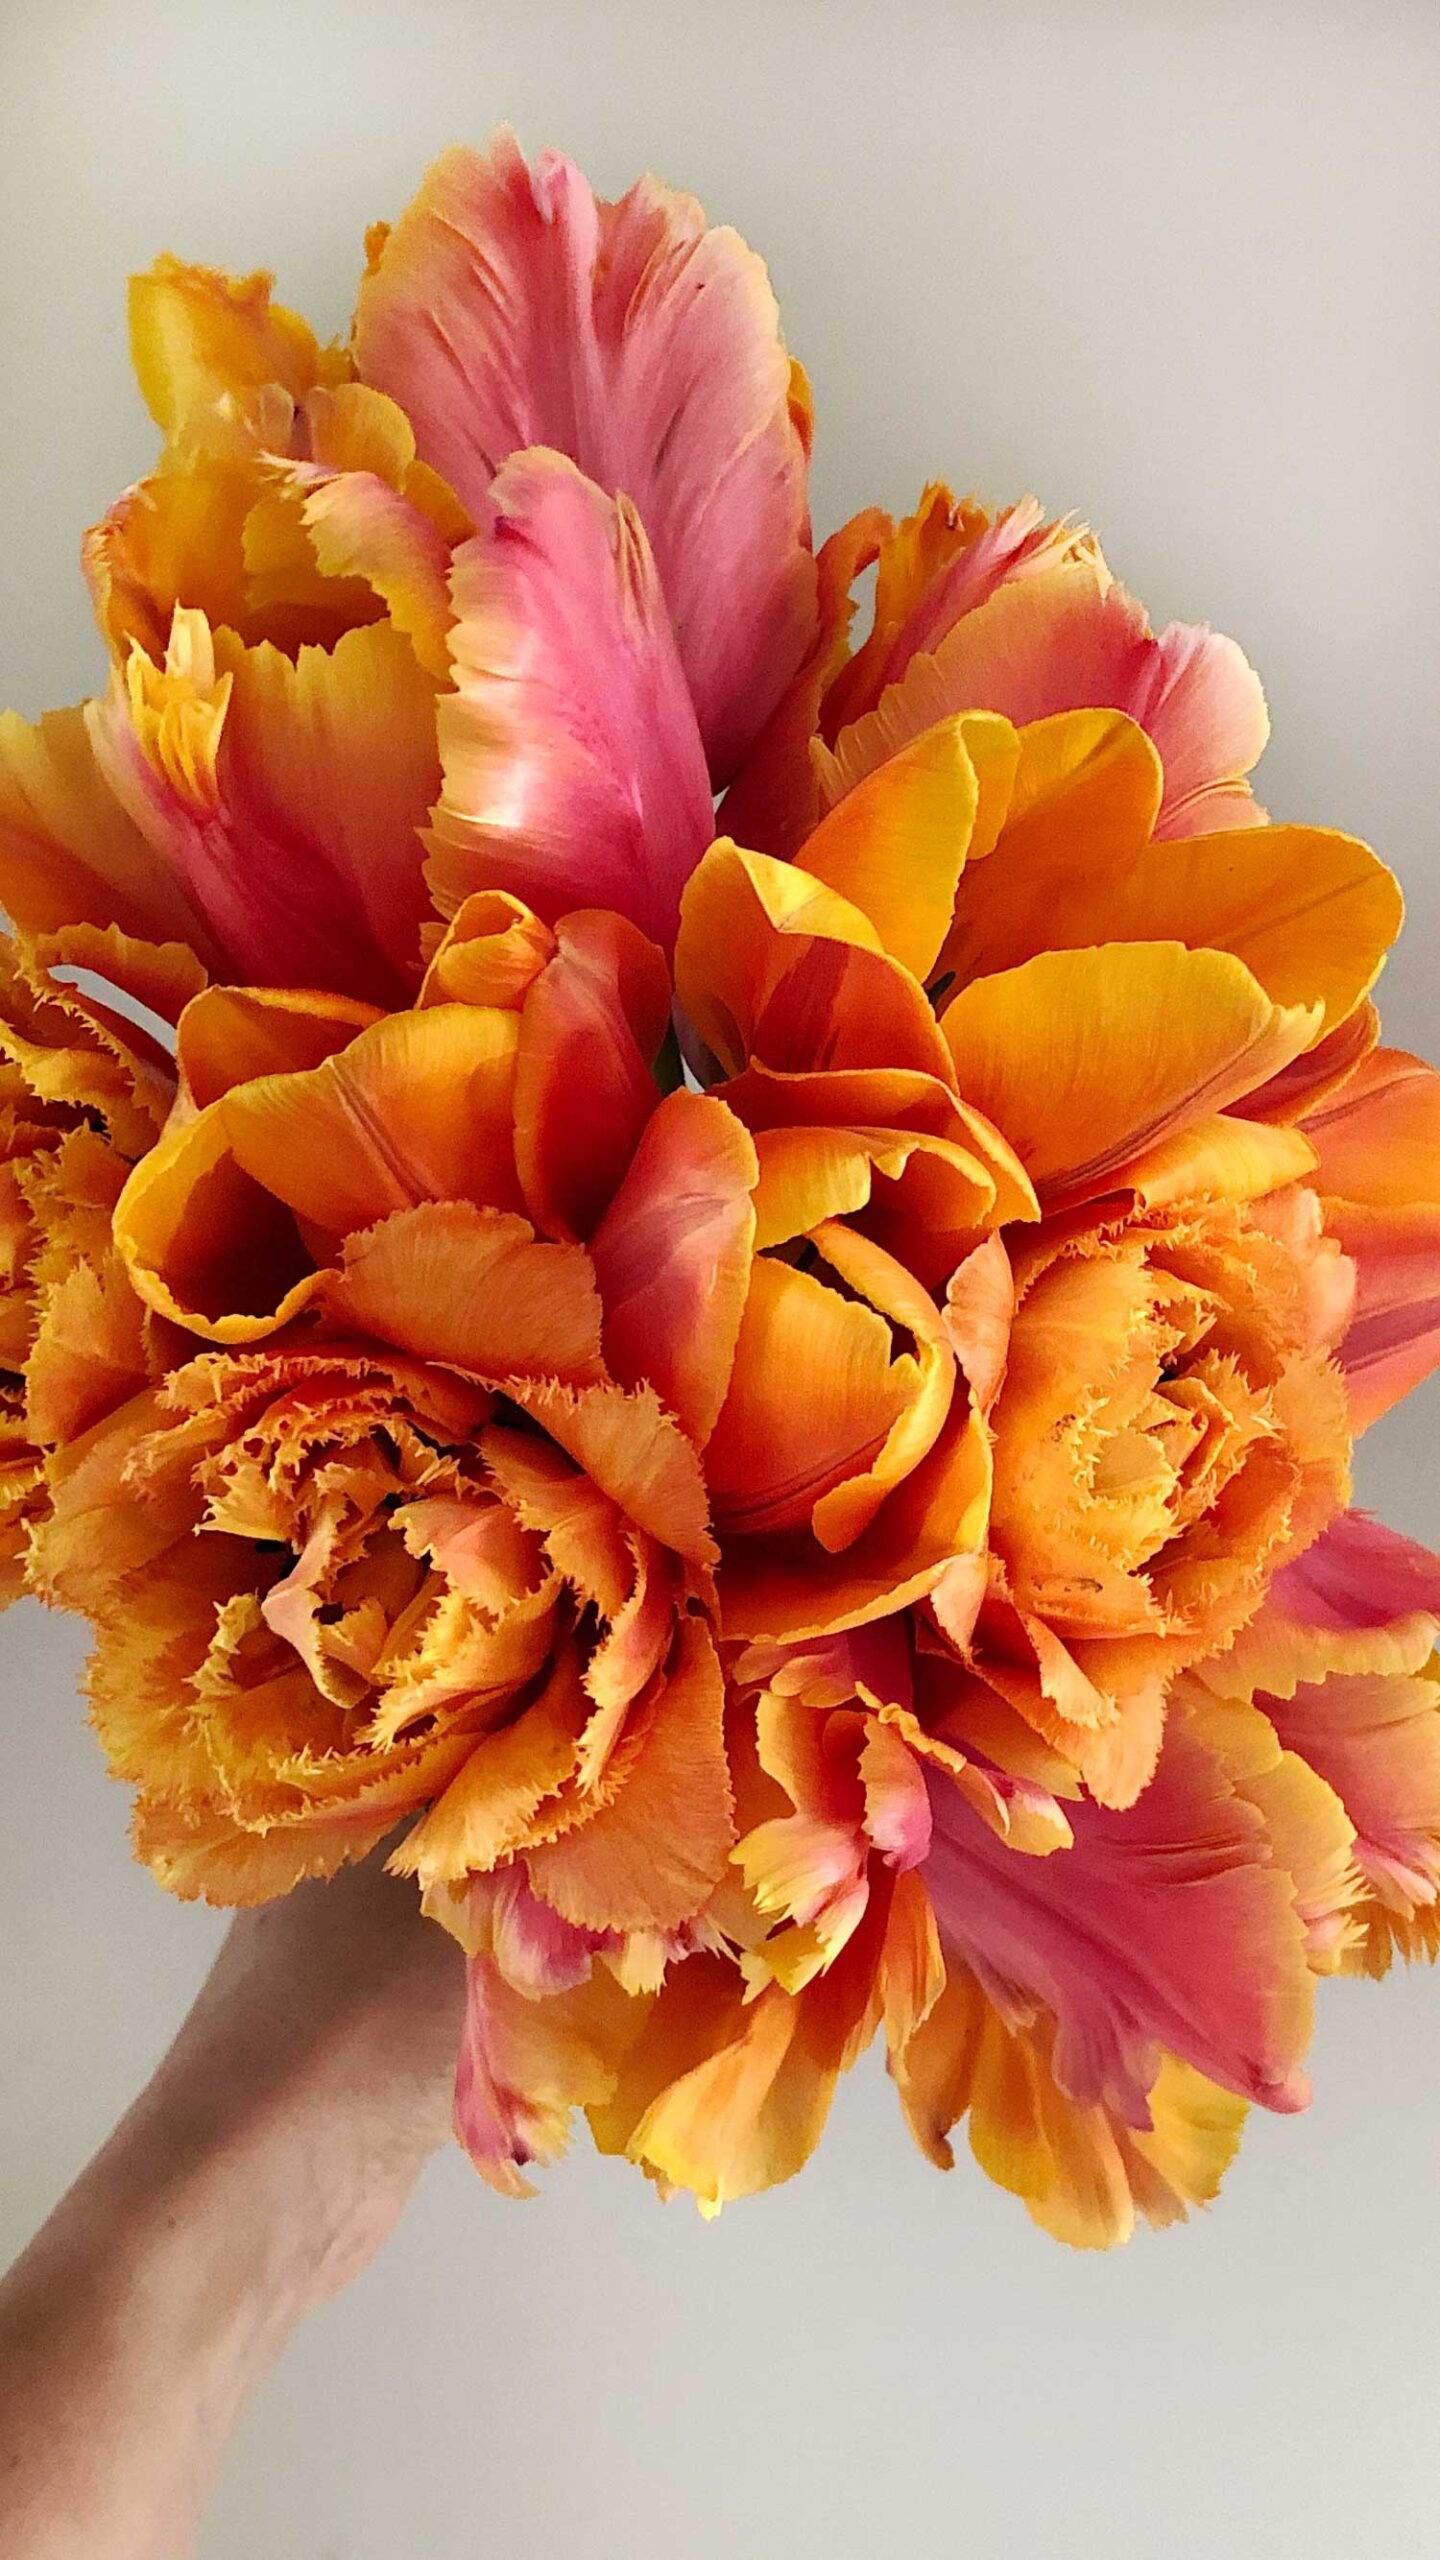 Mixed Tulip Bouquet With Amazing Parrot Tulips, Sensual Touch Double Fringed Tulips, and Princess Irene Tulips In Apricot, Pink & Orange By A Cultivated Living